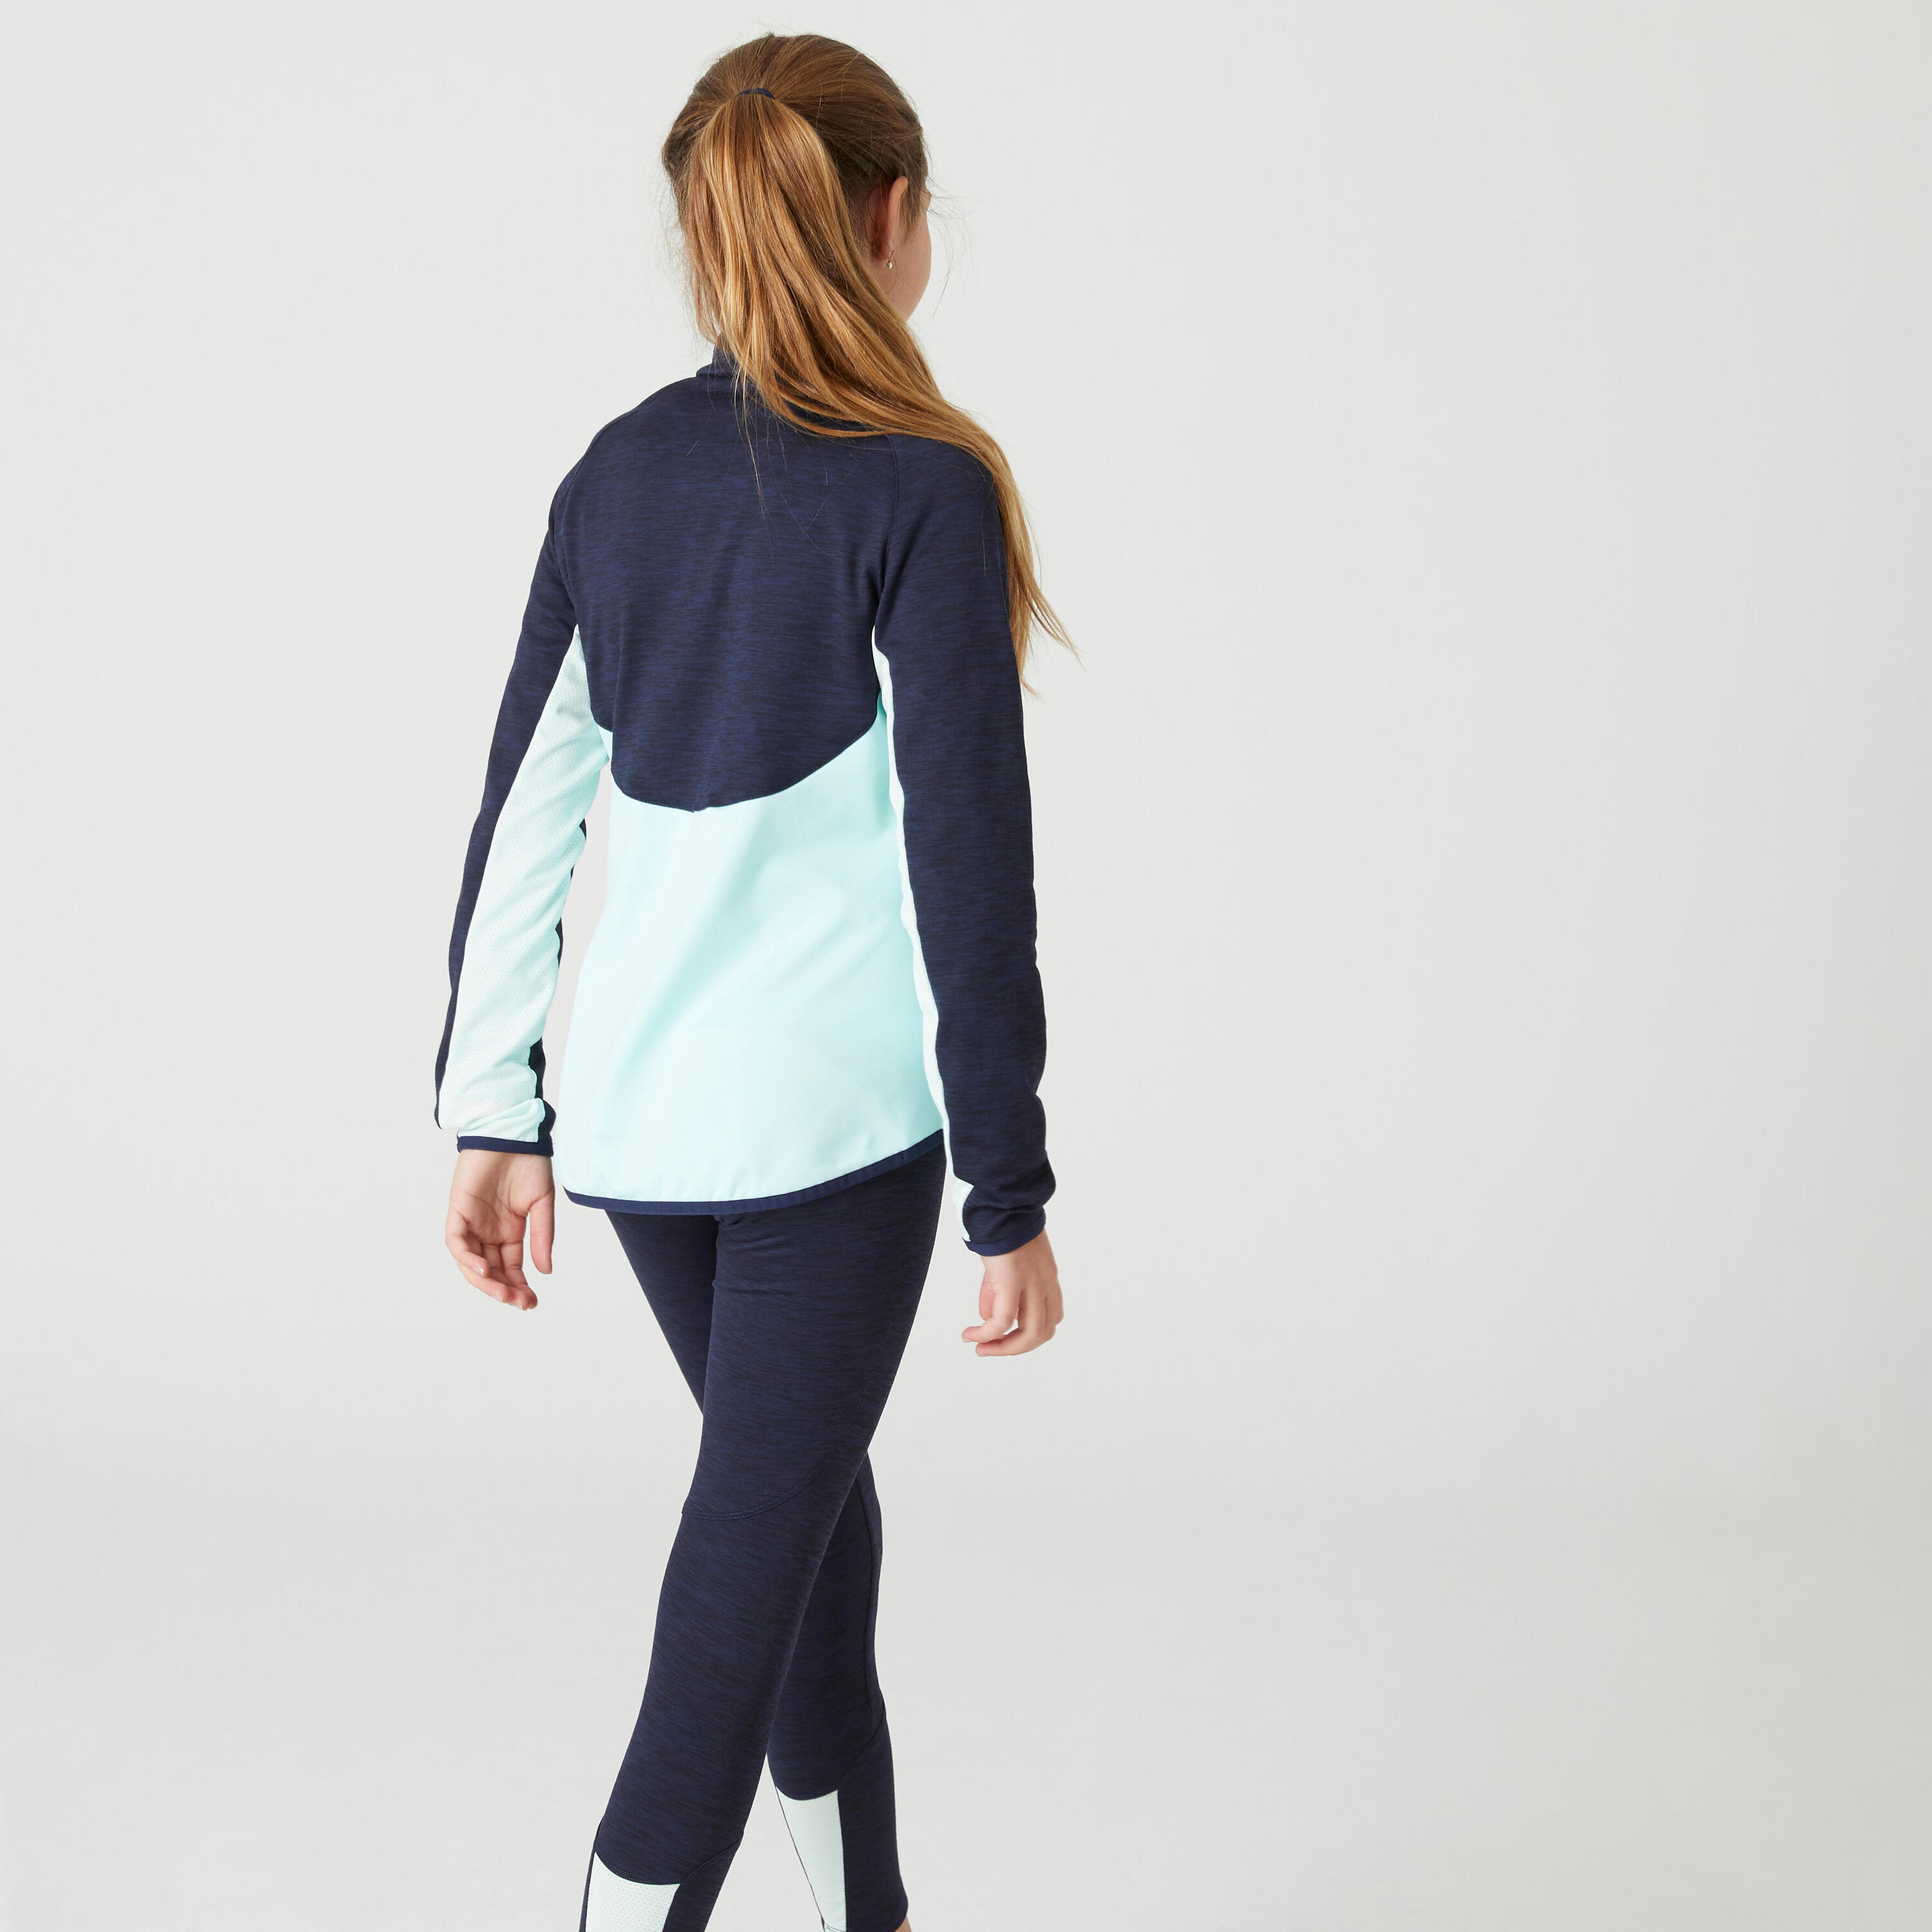 Kids' Breathable Tracksuit S500 - Navy & Green 4/8